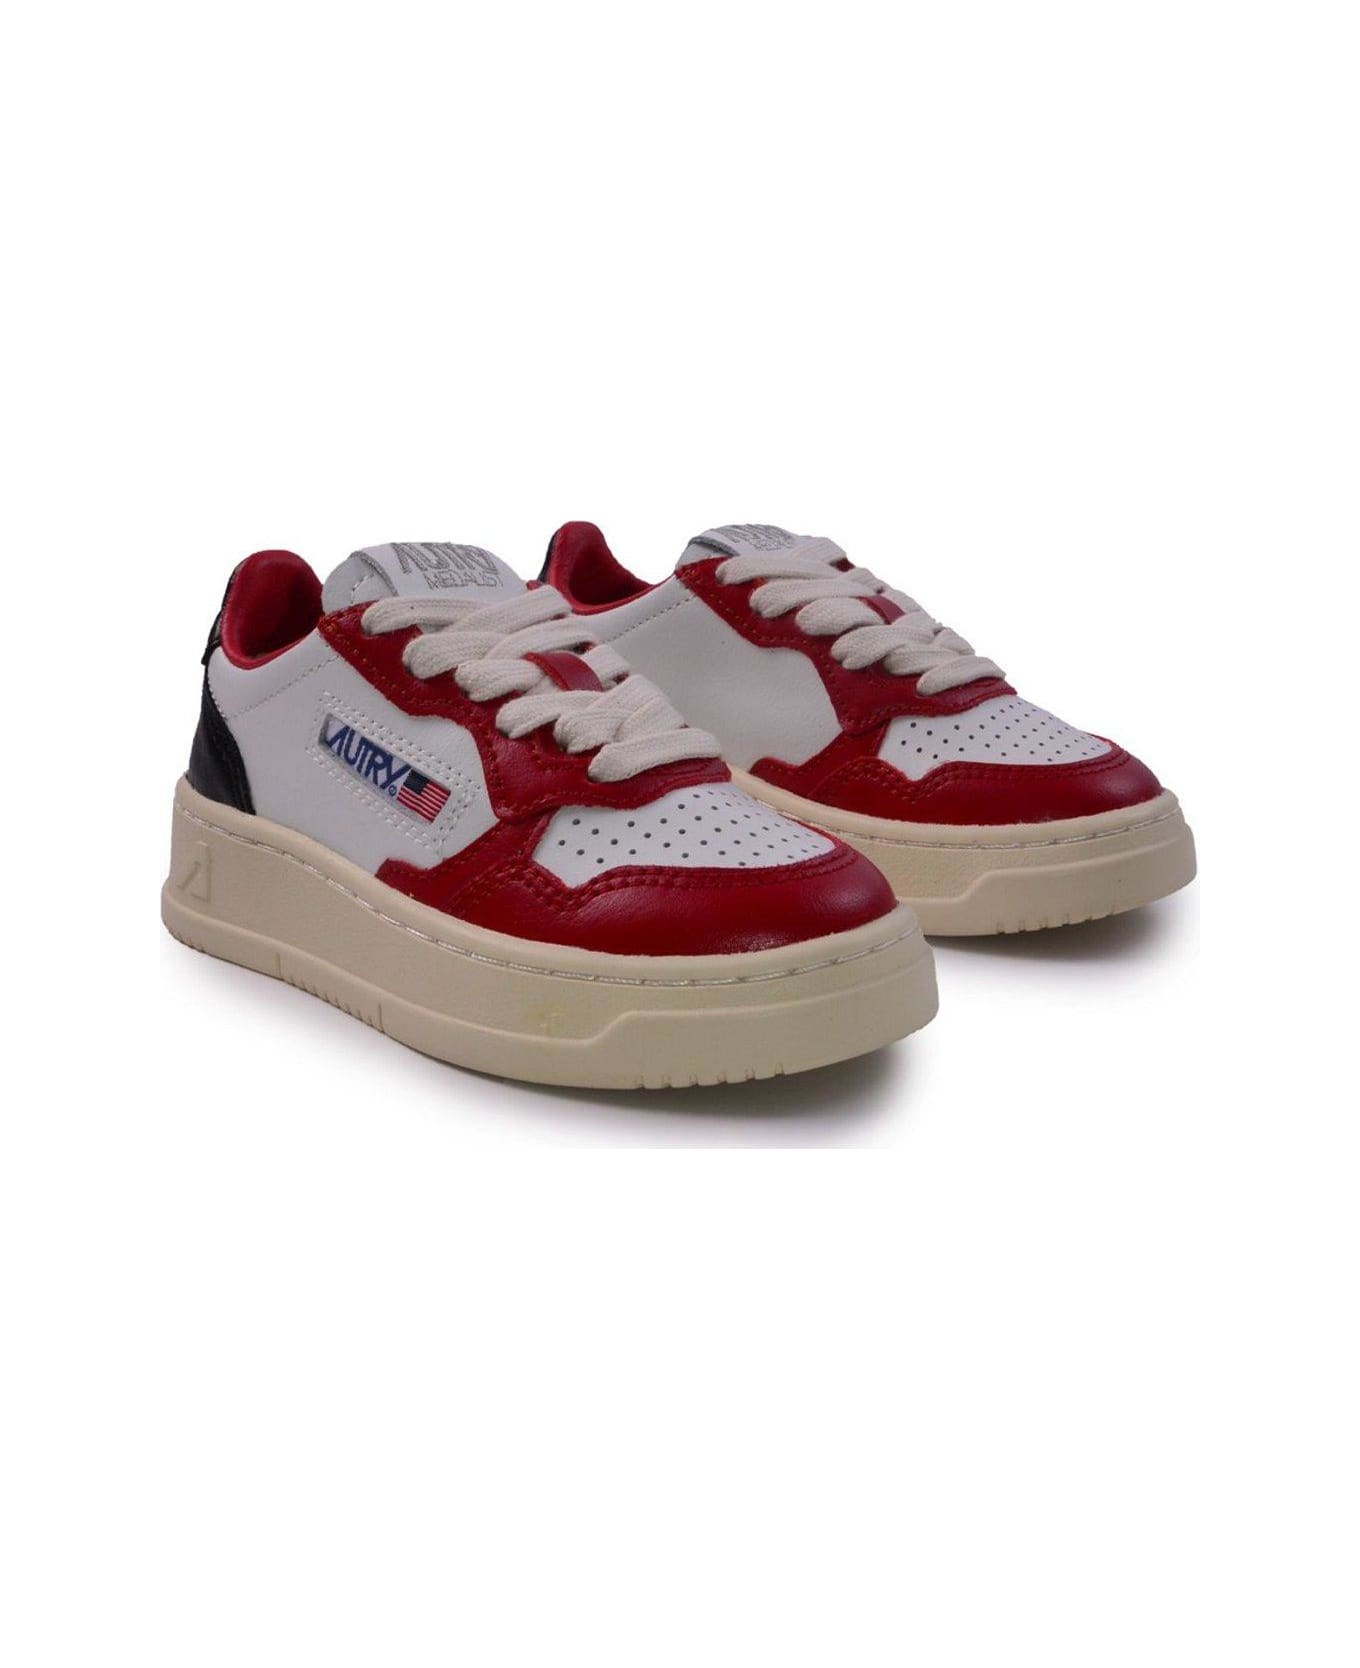 Autry Medalist Lace-up Sneakers - Bianco e Rosso シューズ